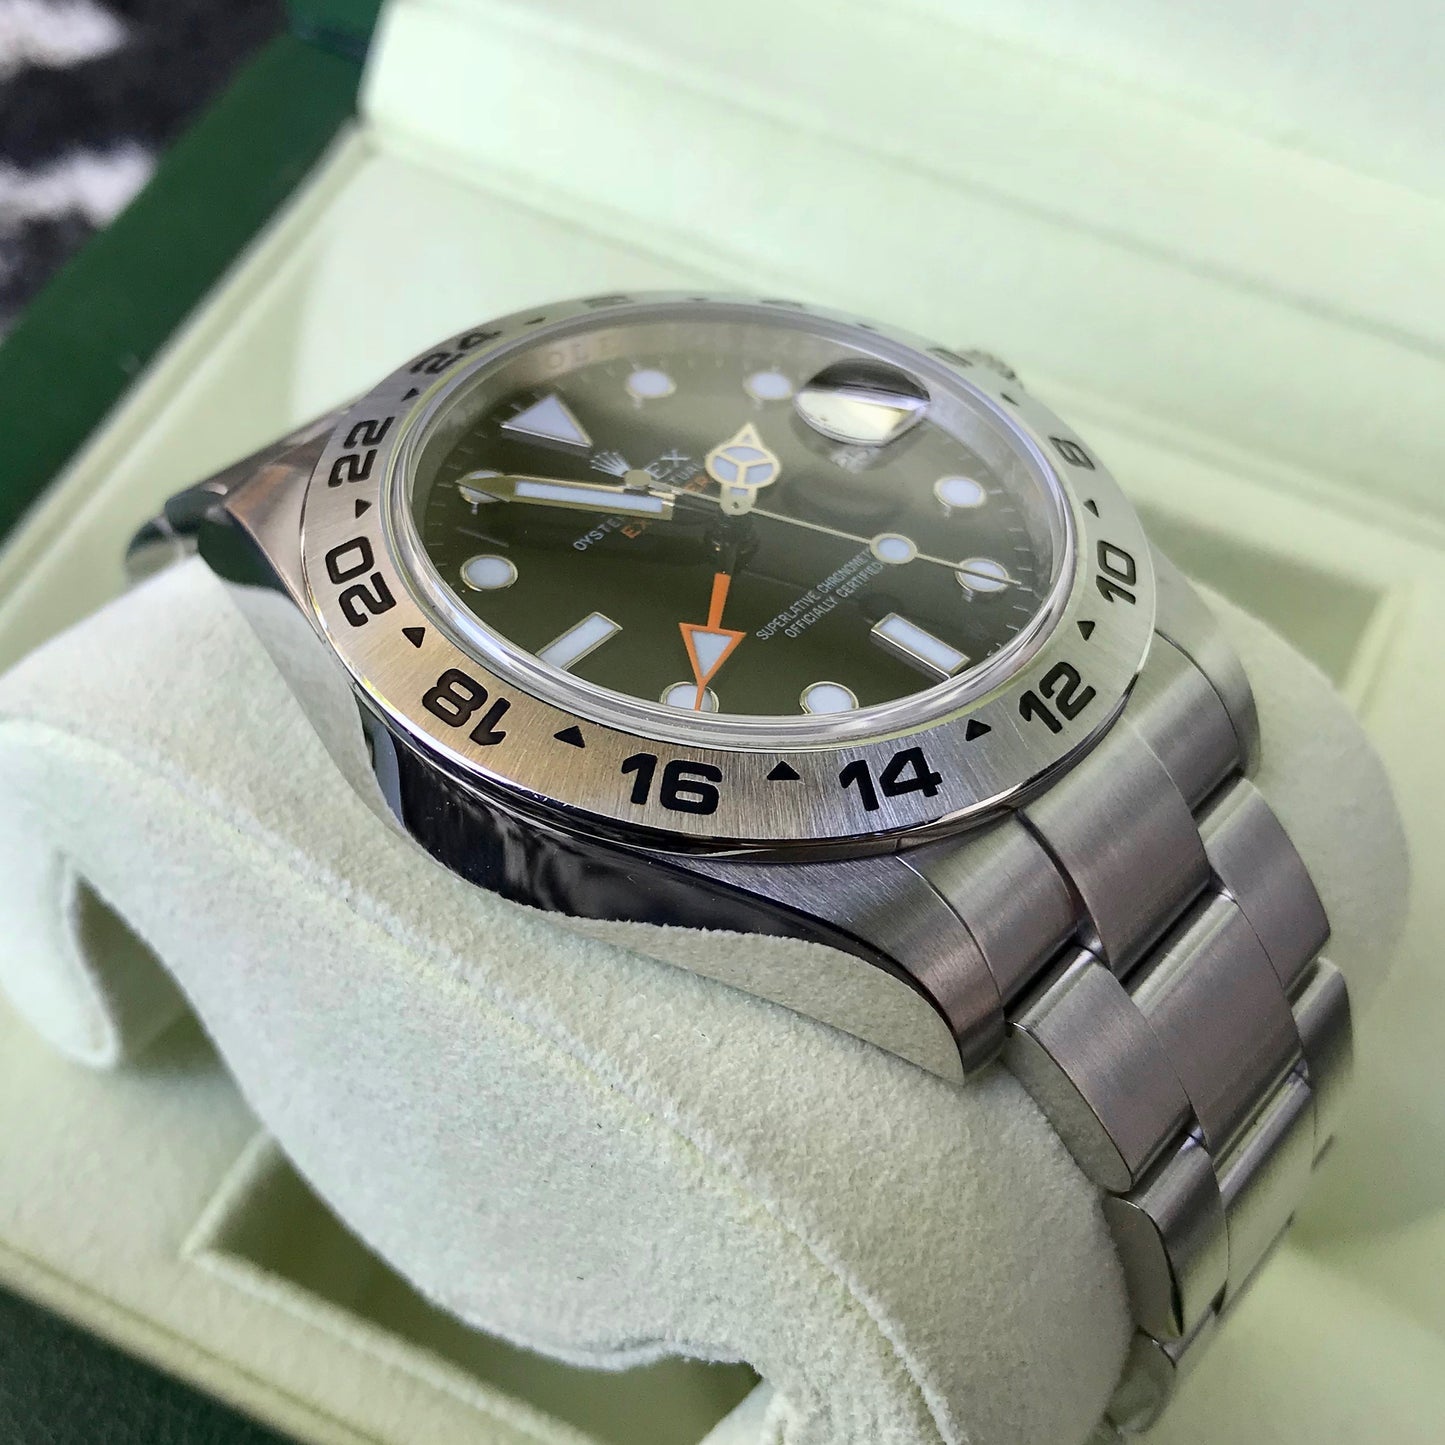 Rolex Explorer II 216570 Black GMT Oyster Perpetual Stainless Steel Wristwatch Box & Papers - Hashtag Watch Company